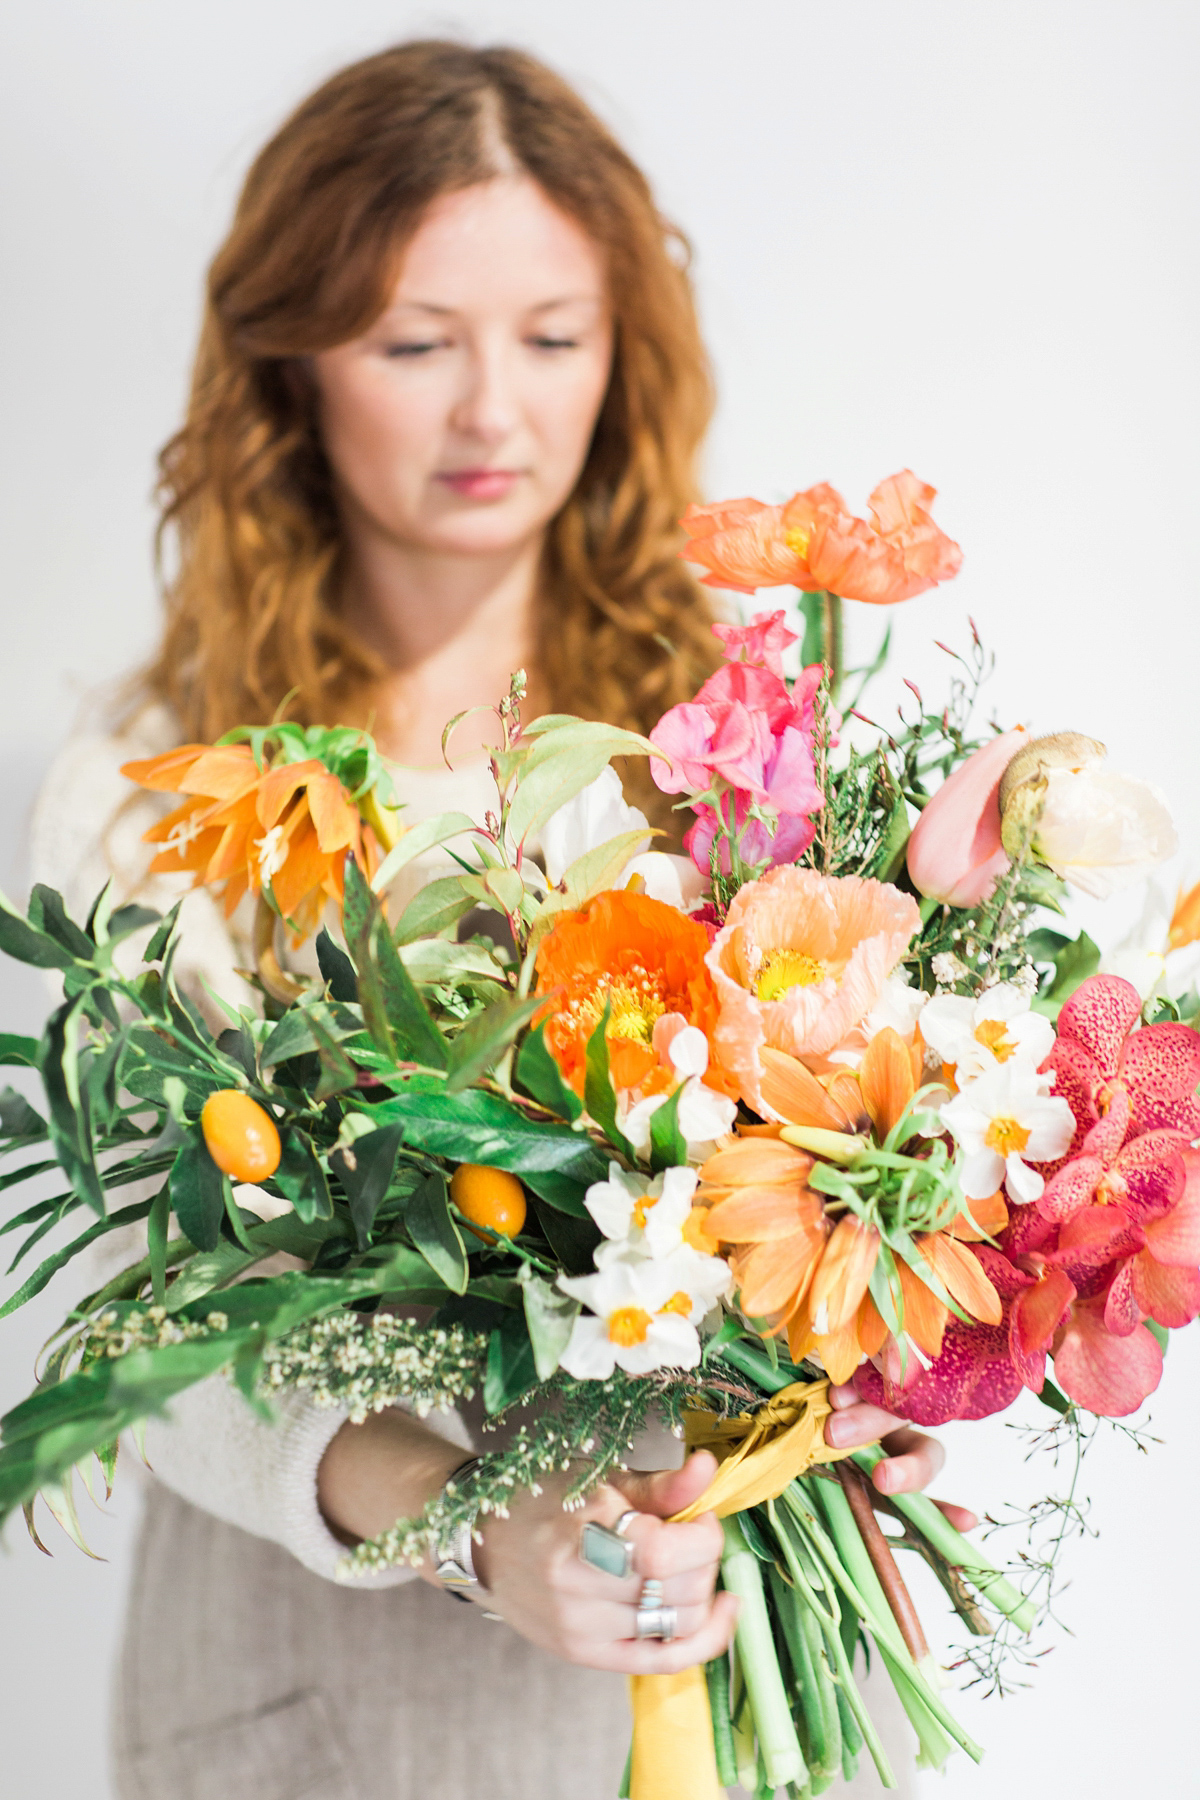 How to design your own wedding bouquet - advice from Georgia of Westwood Design. Images by Sarah Hannam Photography.